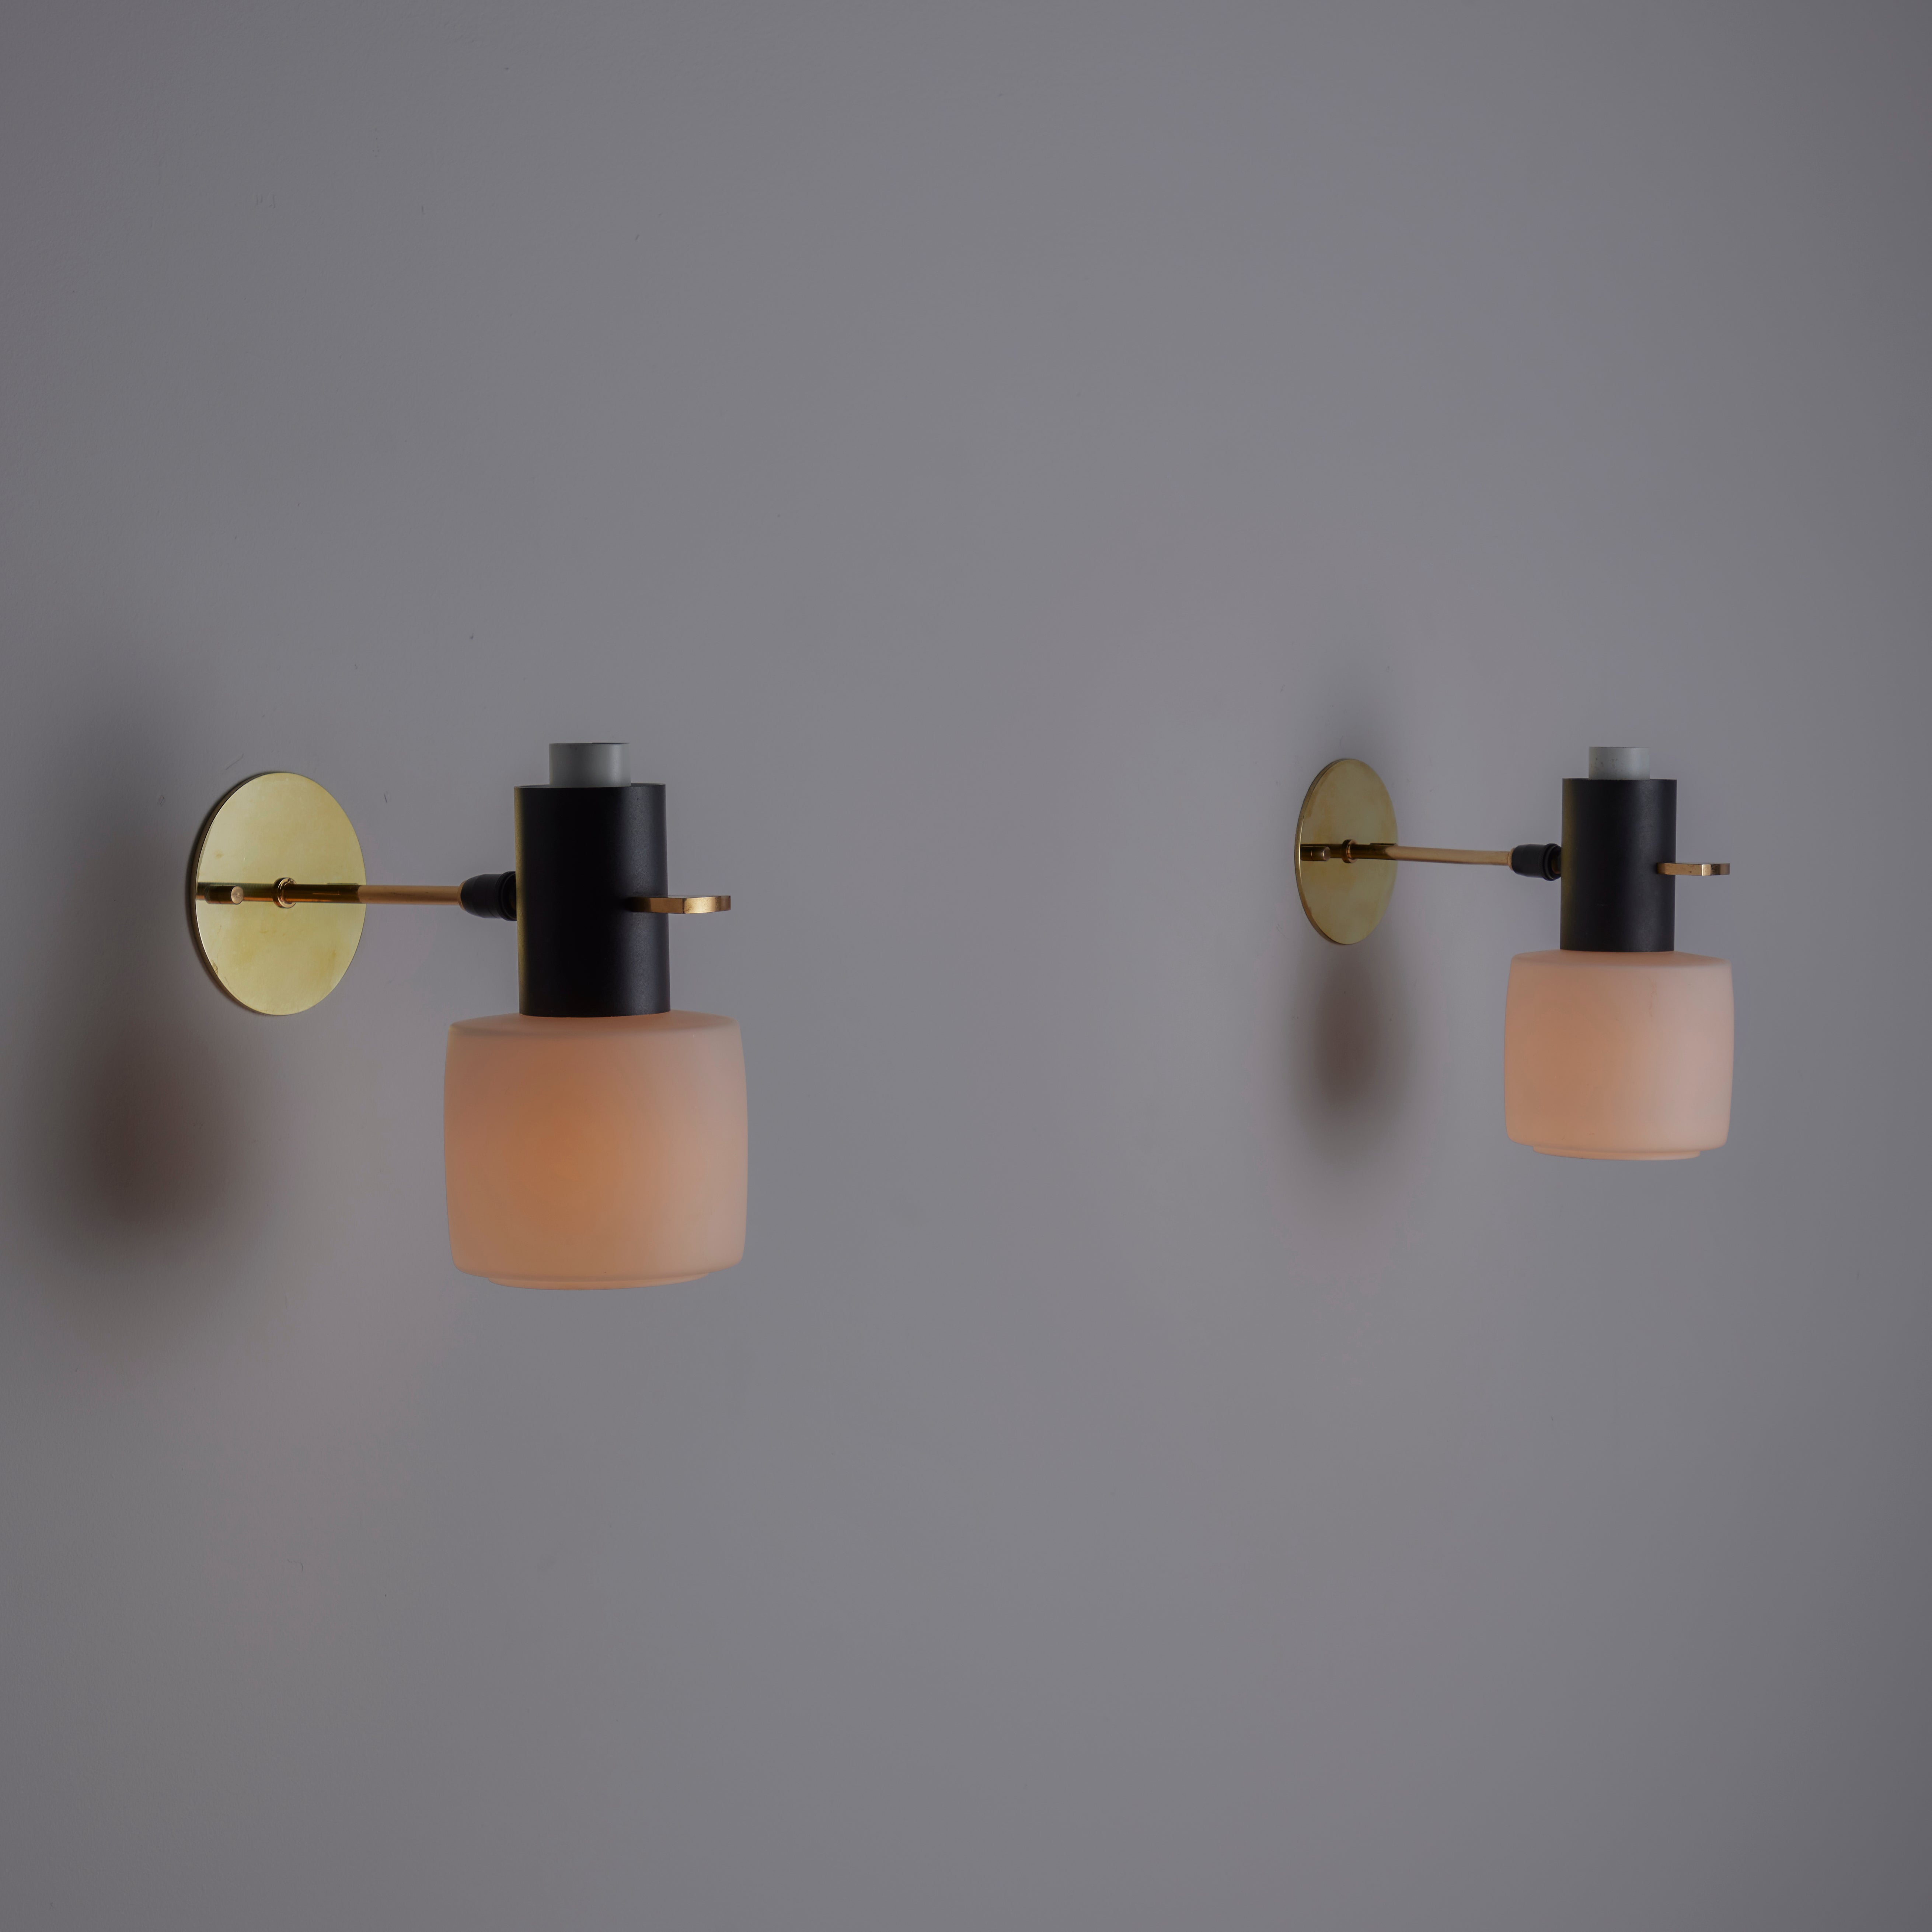 Pair of Sconces by Lunel. Designed and manufactured in Italy, circa the 1950s. Chalice-shaped opal glass cups nestle below a black enameled and brass armature construction. Each sconce holds a single E14 socket type, adapted for the US. We recommend